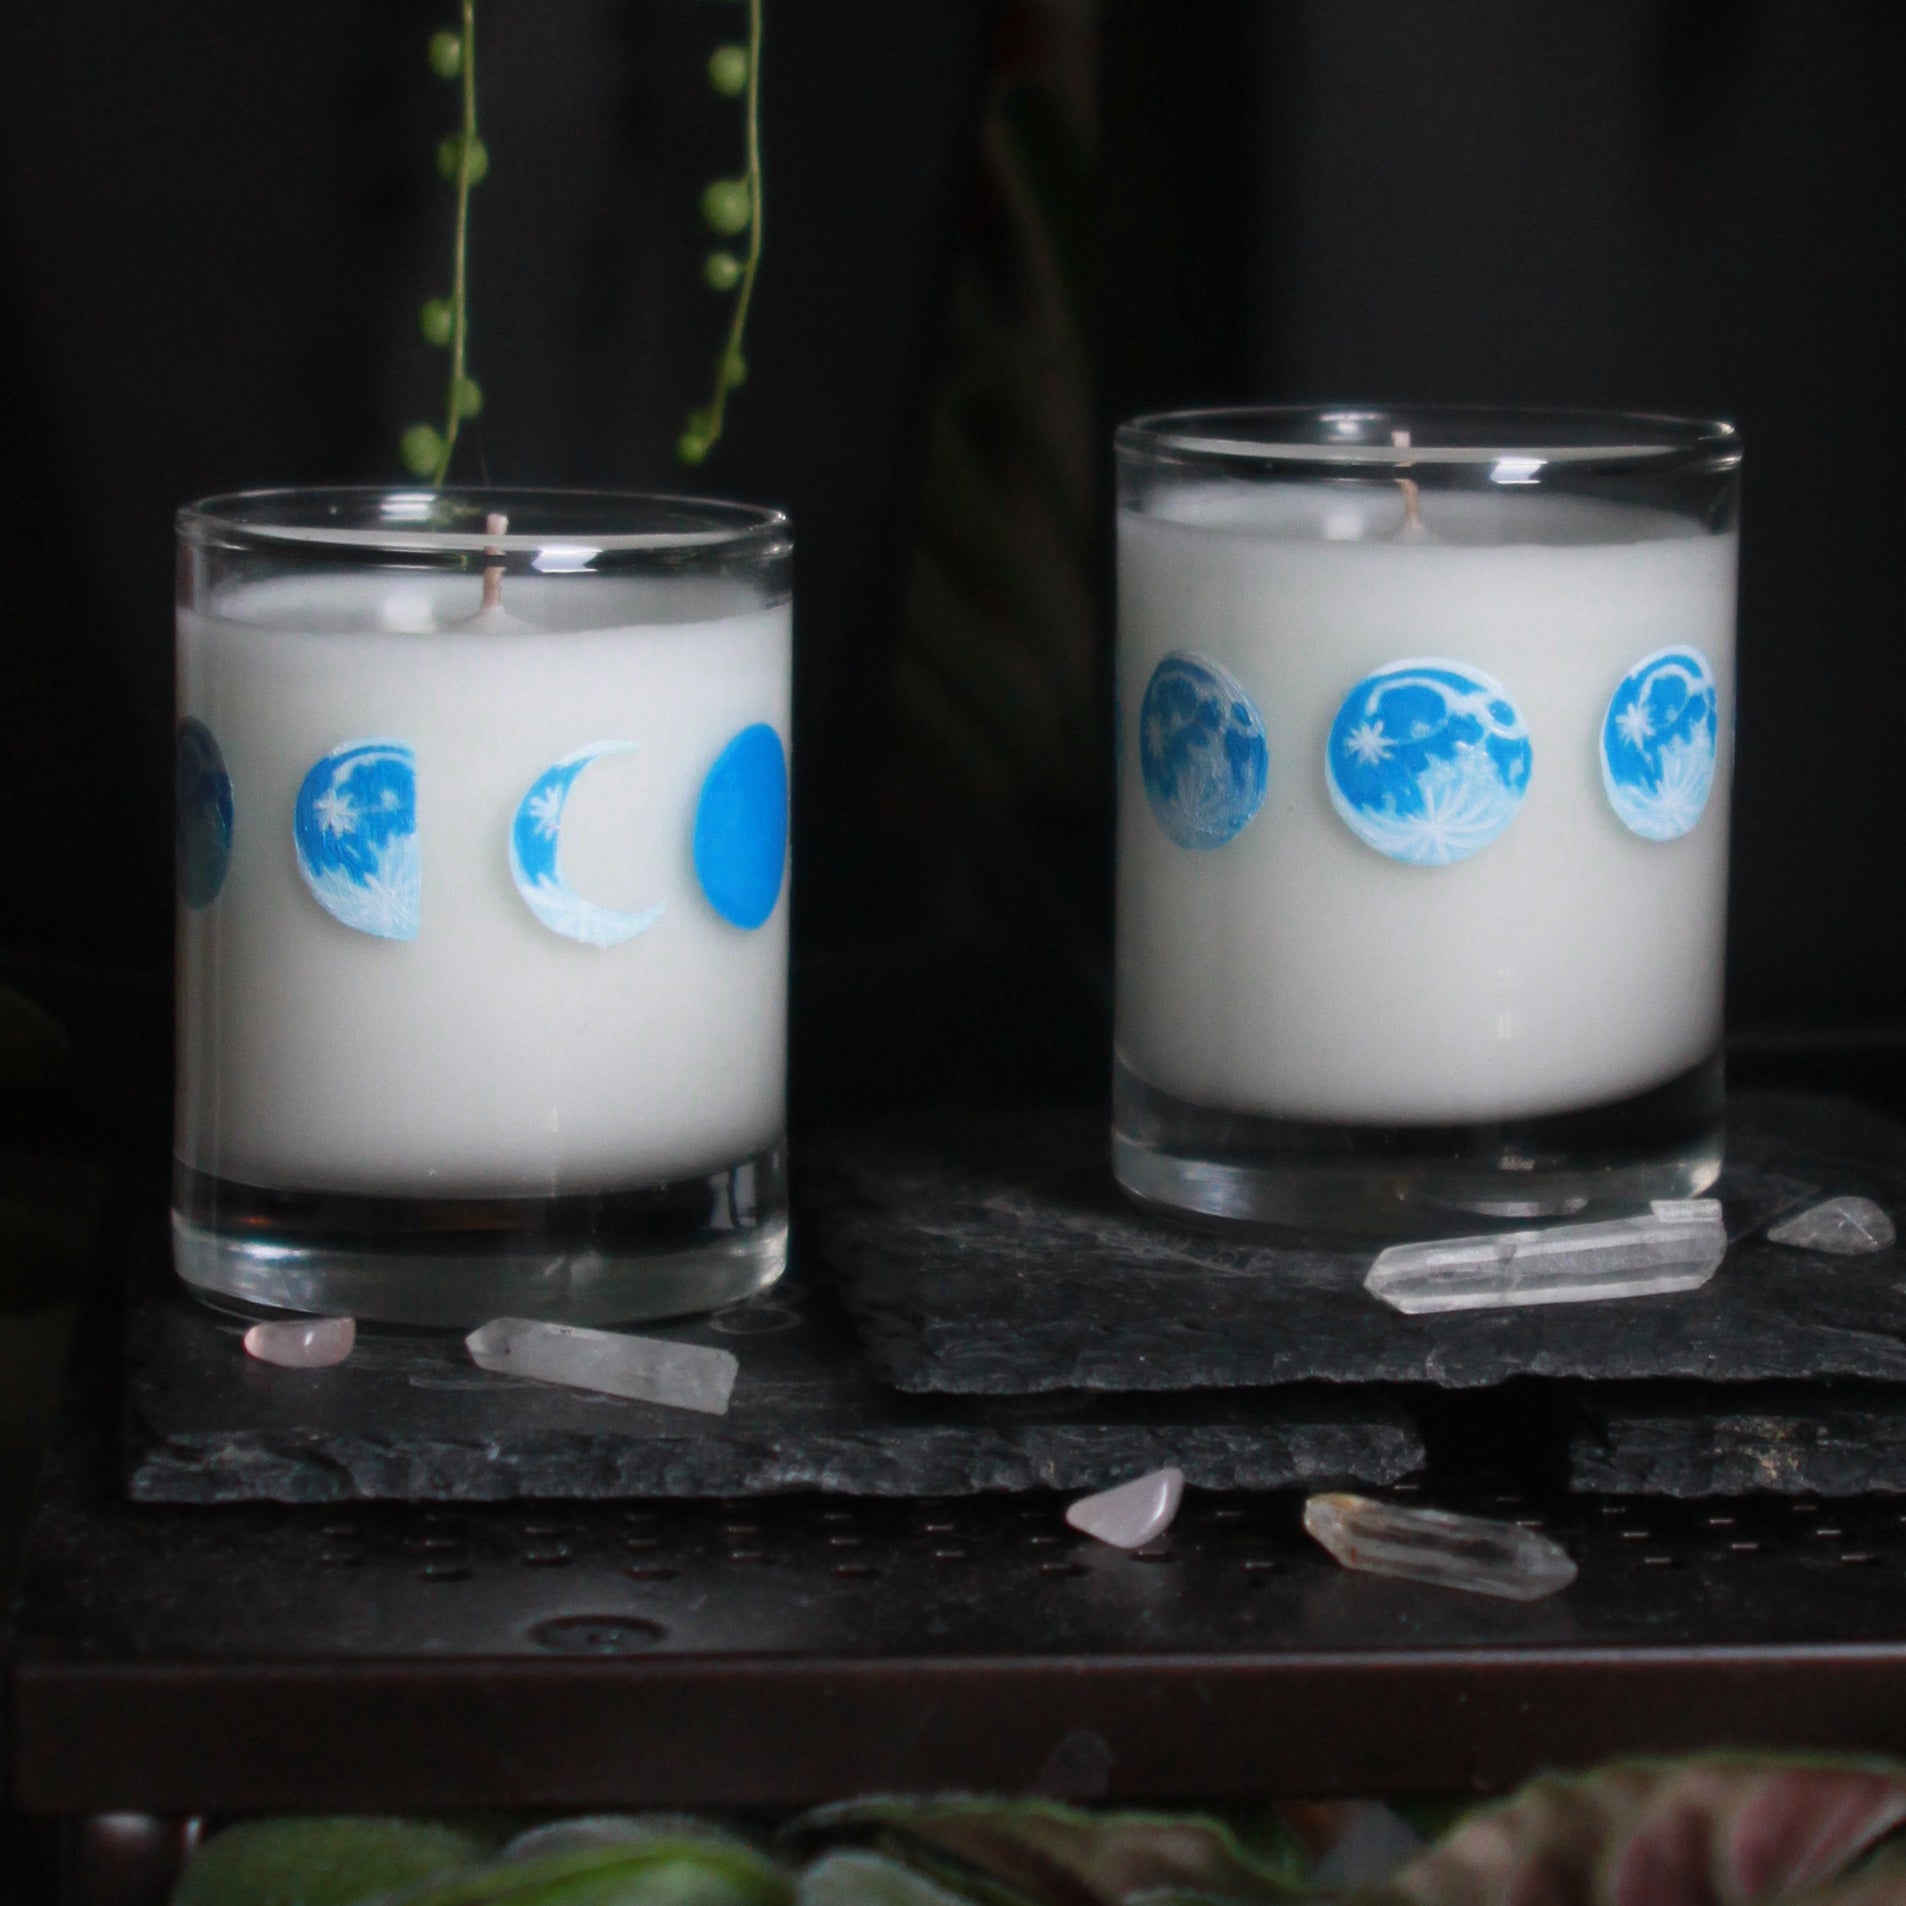 Three candle votives poured with white coconut-apricot wax each feature 8 hand-painted phases of the moon in shades of blue. The designs wraps around each glass.